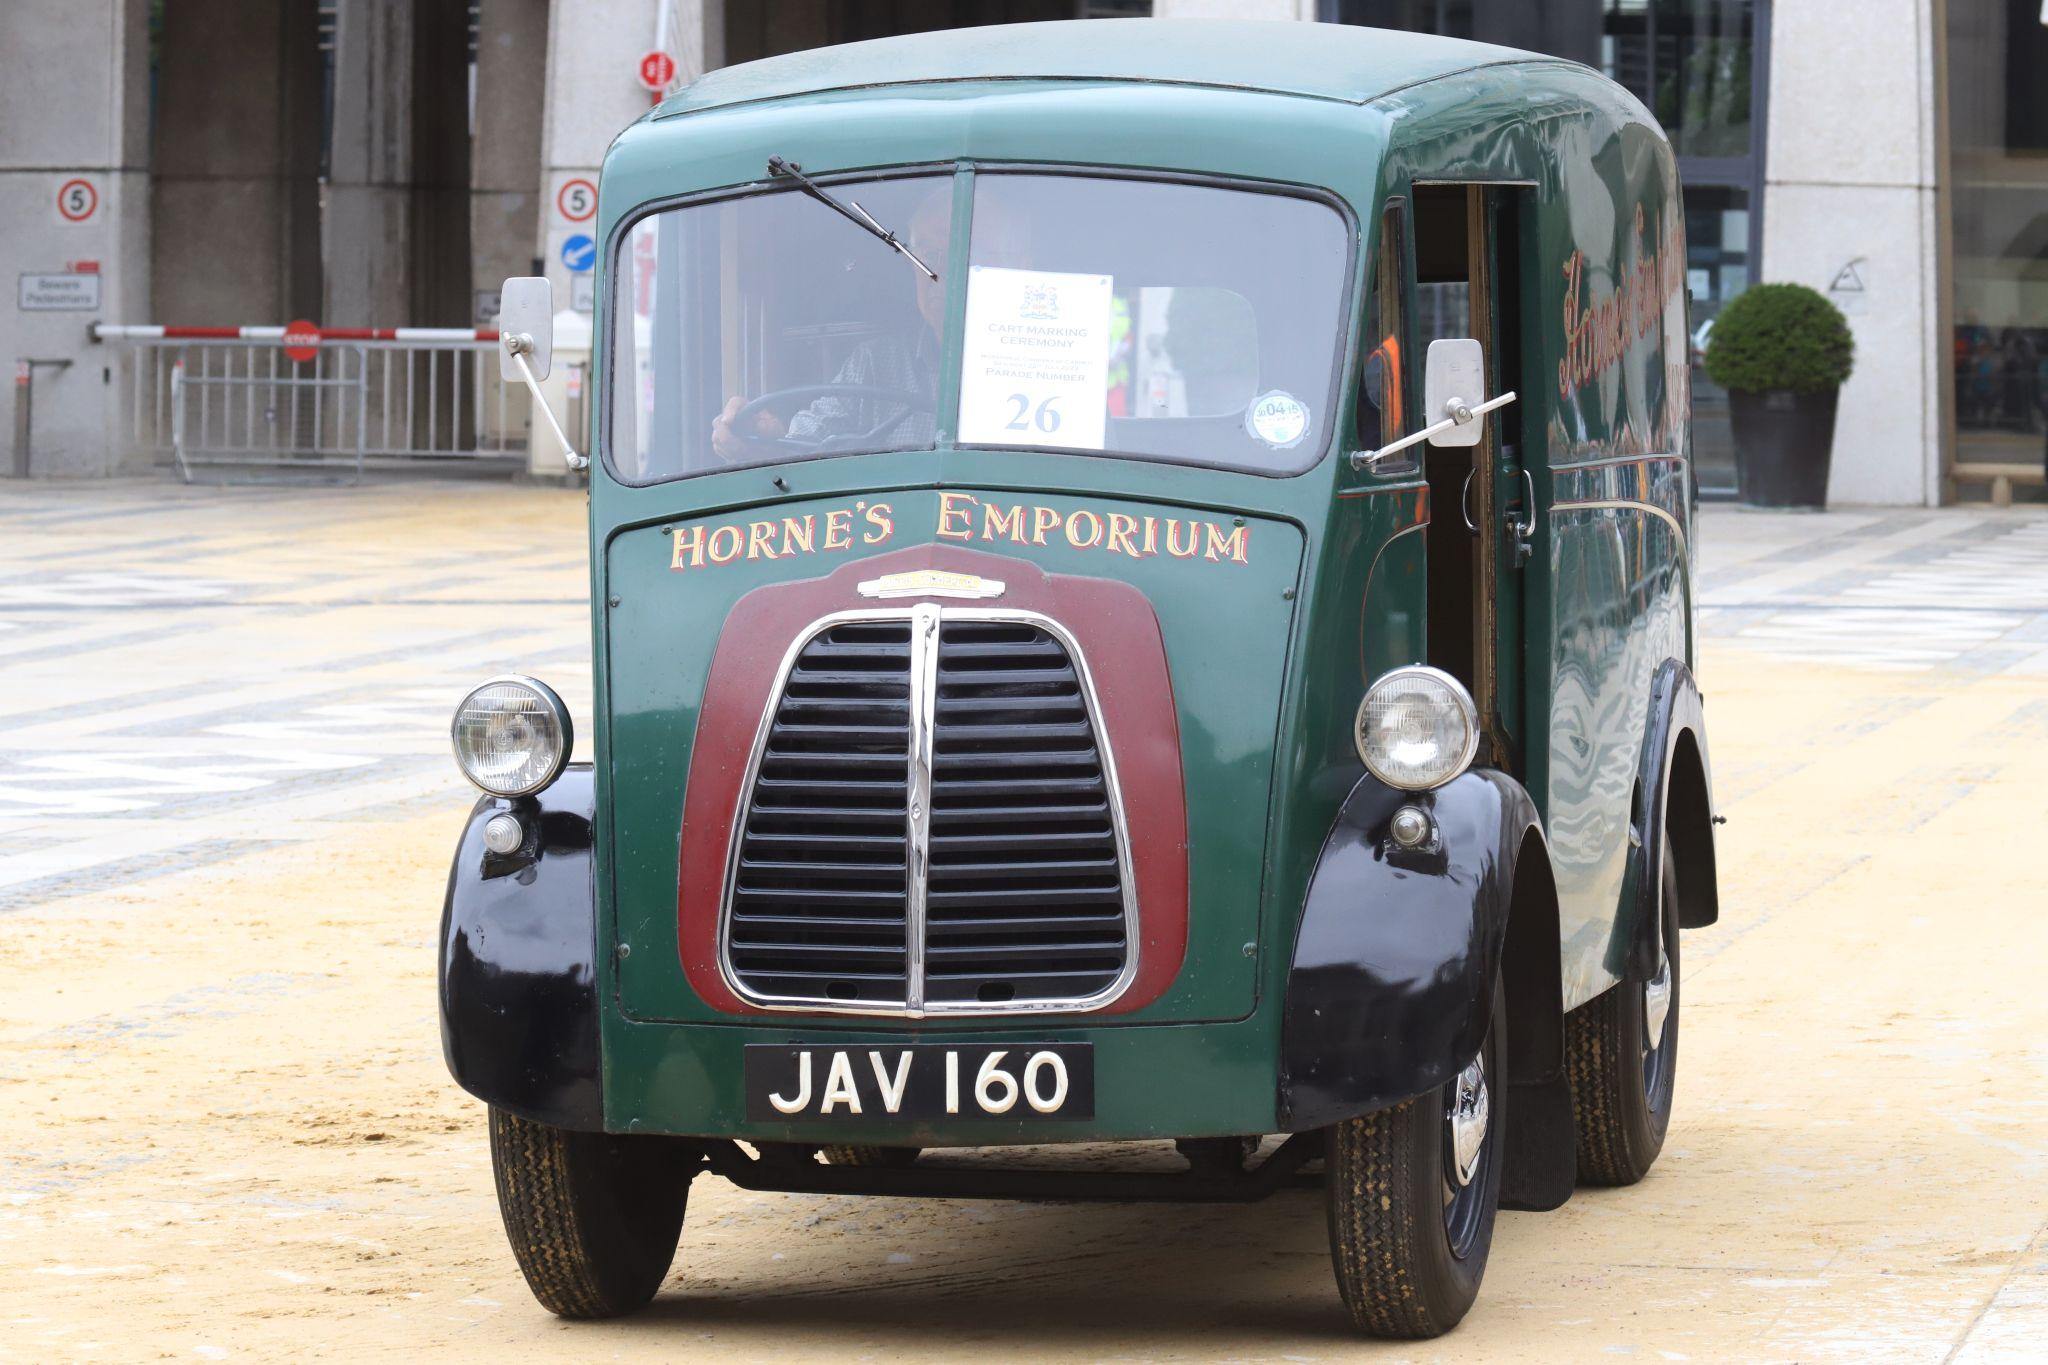 Morris J Type 1955 JAV160. City of London 2023 Cart Marking in Guildhall Yard on 22-Jul-2023. Hosted by the Worshipful Company of Carmen with the Lord Mayor of the City of London in attendance. Wooden plates on the vehicles are branded with hot irons to allow them to ply for trade in the Square Mile. Another of the City Livery Company's annual ceremonies.